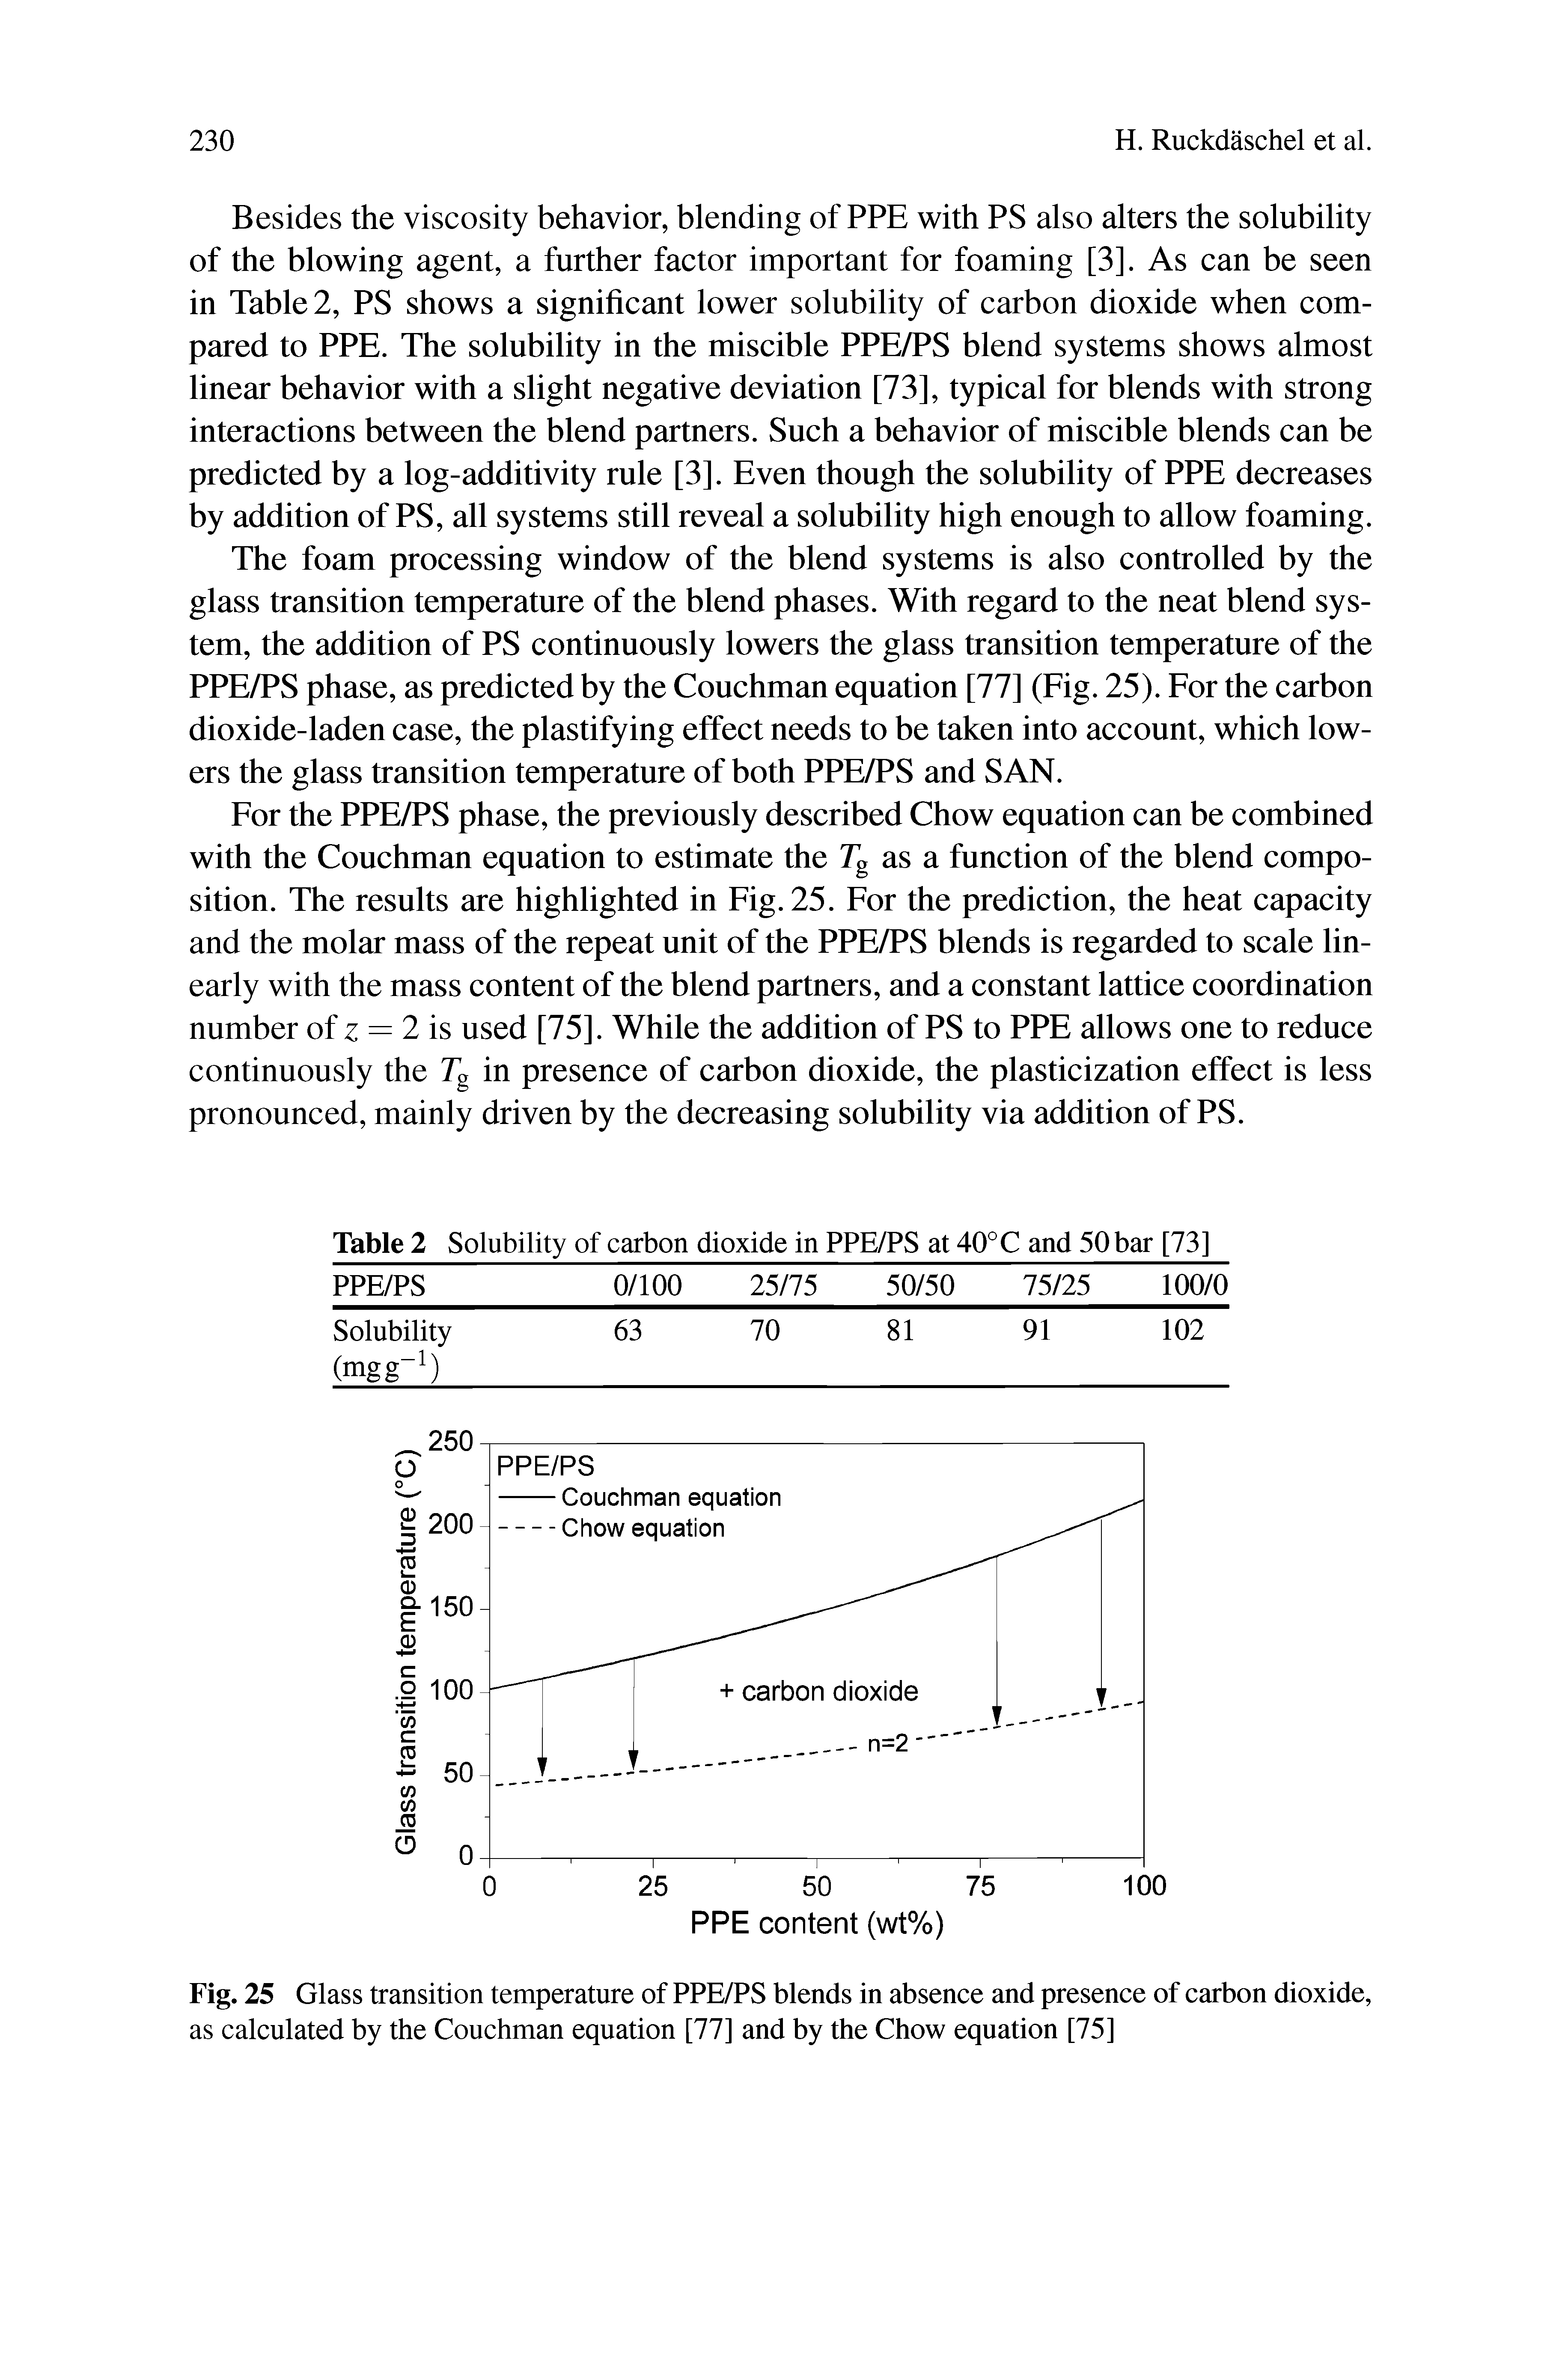 Fig. 25 Glass transition temperature of PPE/PS blends in absence and presence of carbon dioxide, as calculated by the Couchman equation [77] and by the Chow equation [75]...